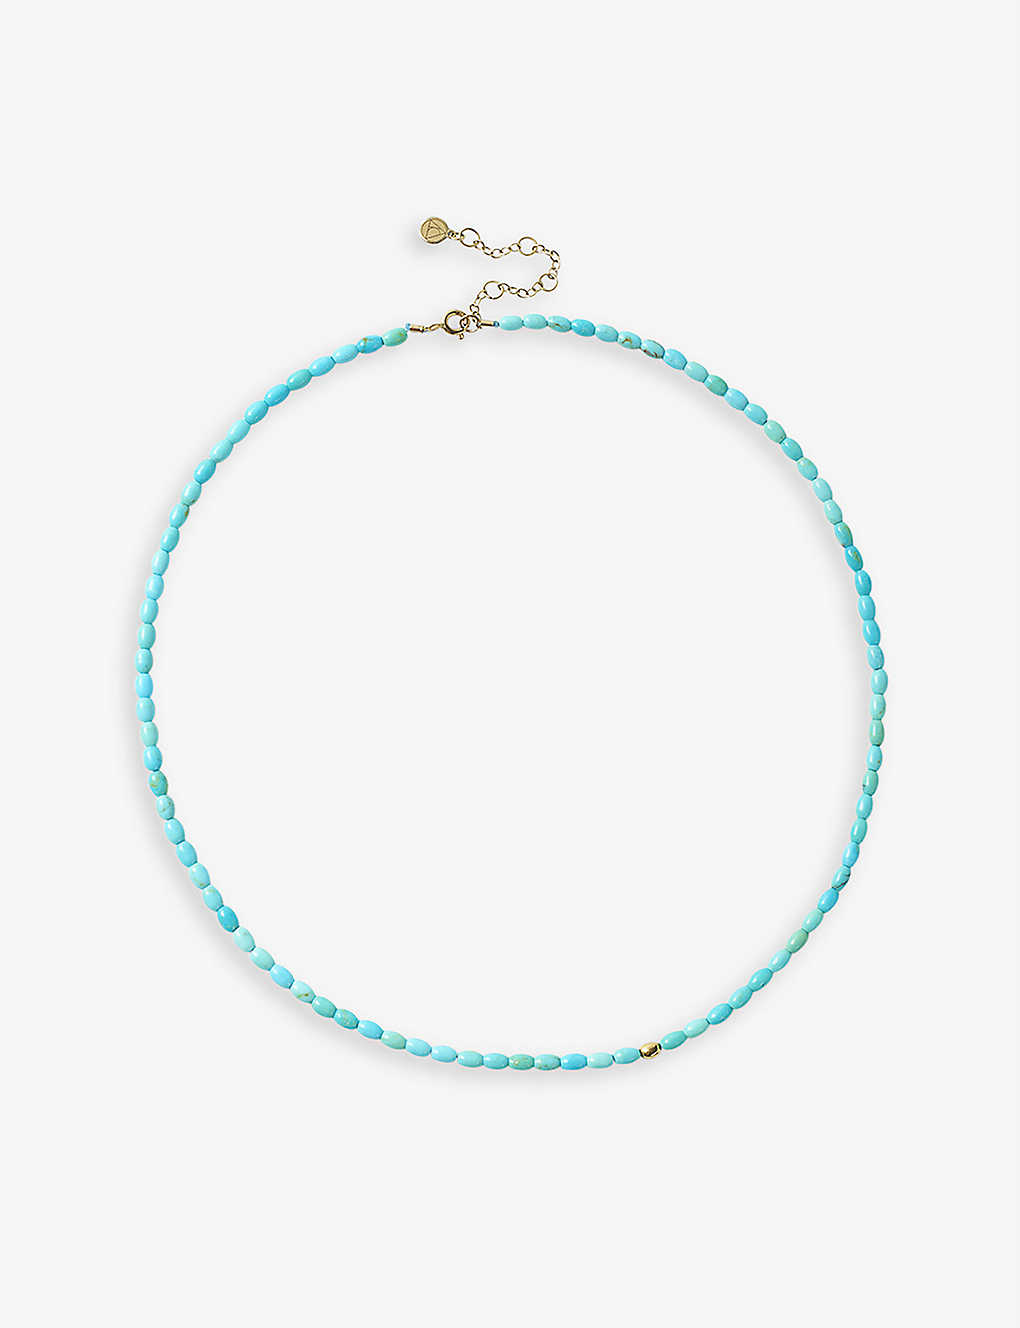 The Alkemistry Vianna 18ct Yellow Gold And Turquoise Necklace